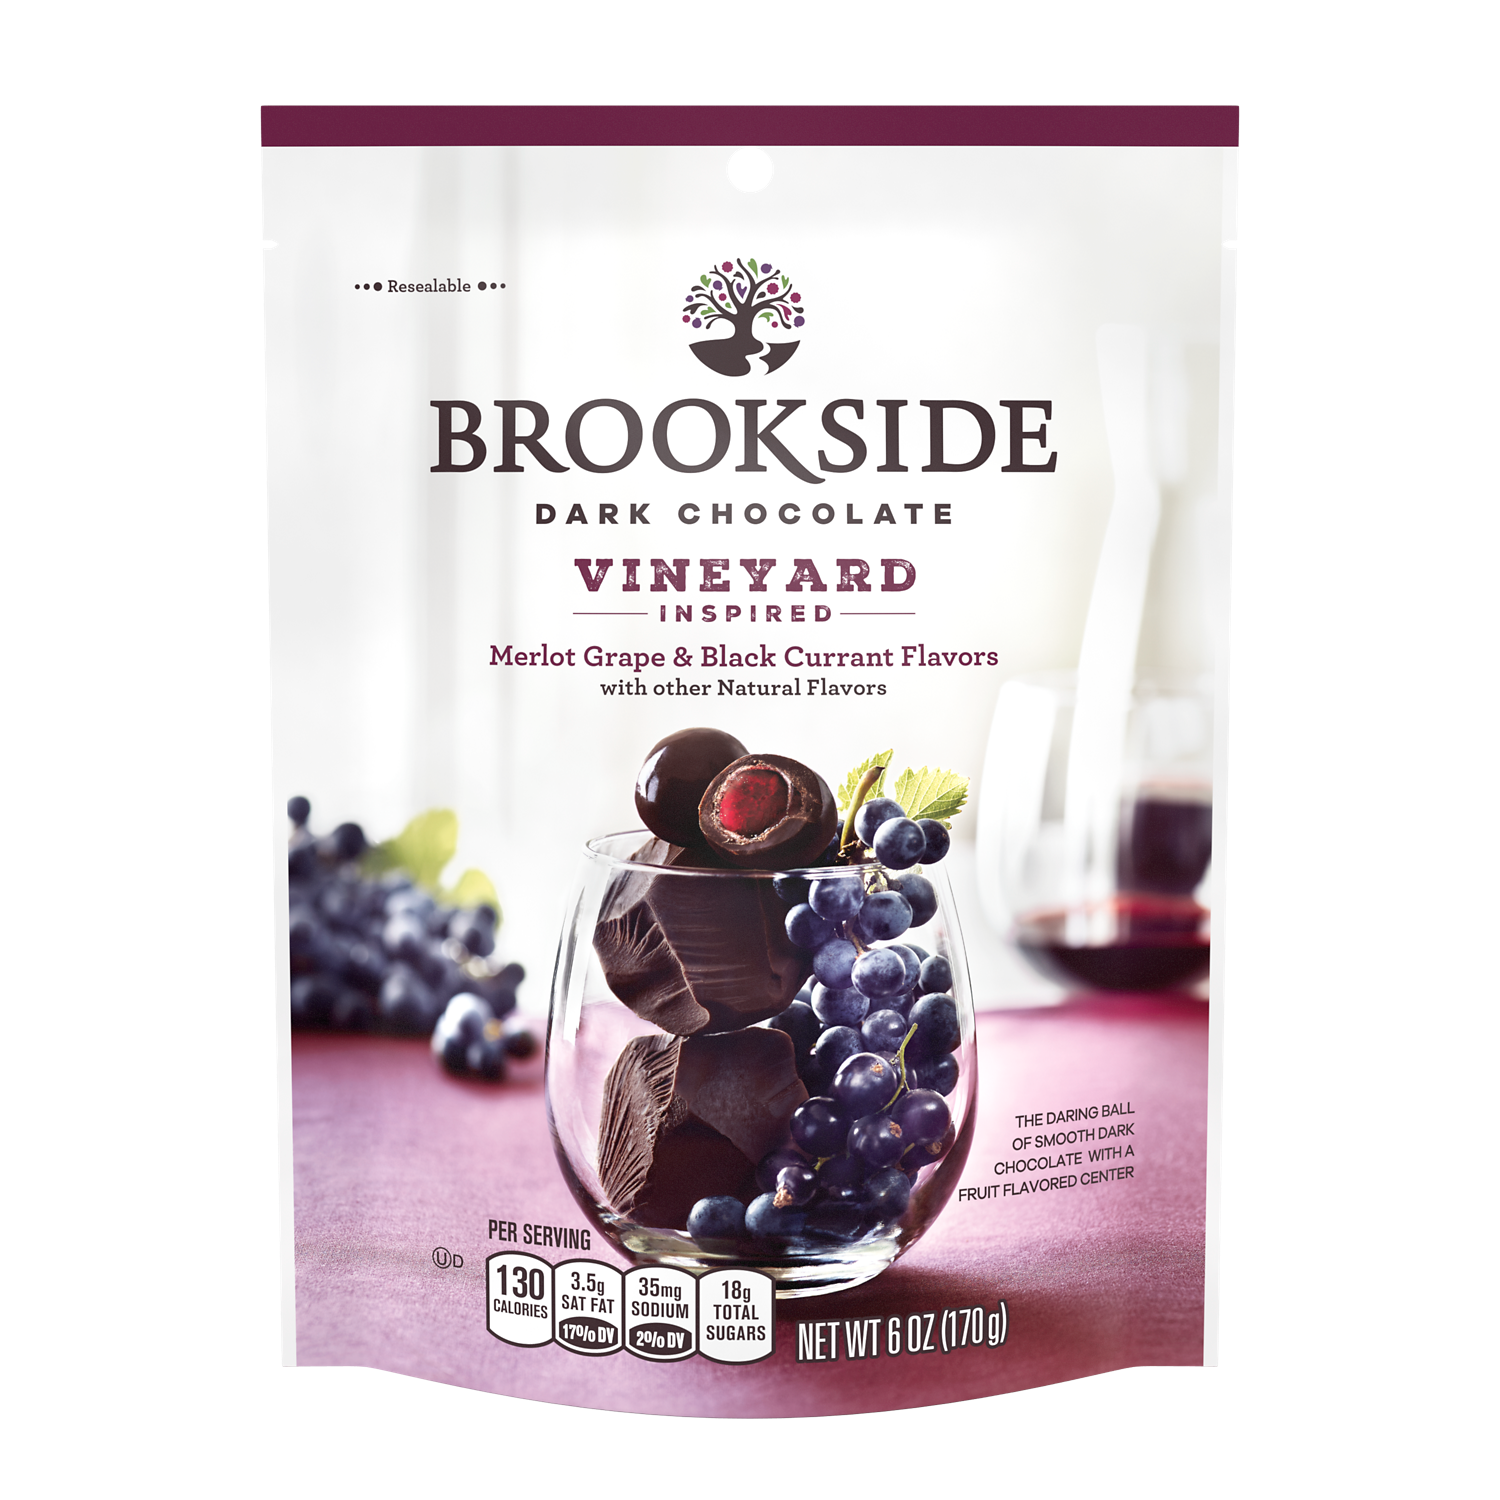 BROOKSIDE Dark Chocolate Vineyard Inspired Merlot Grape and Black Currant Flavors Candy, 6 oz bag - Front of Package